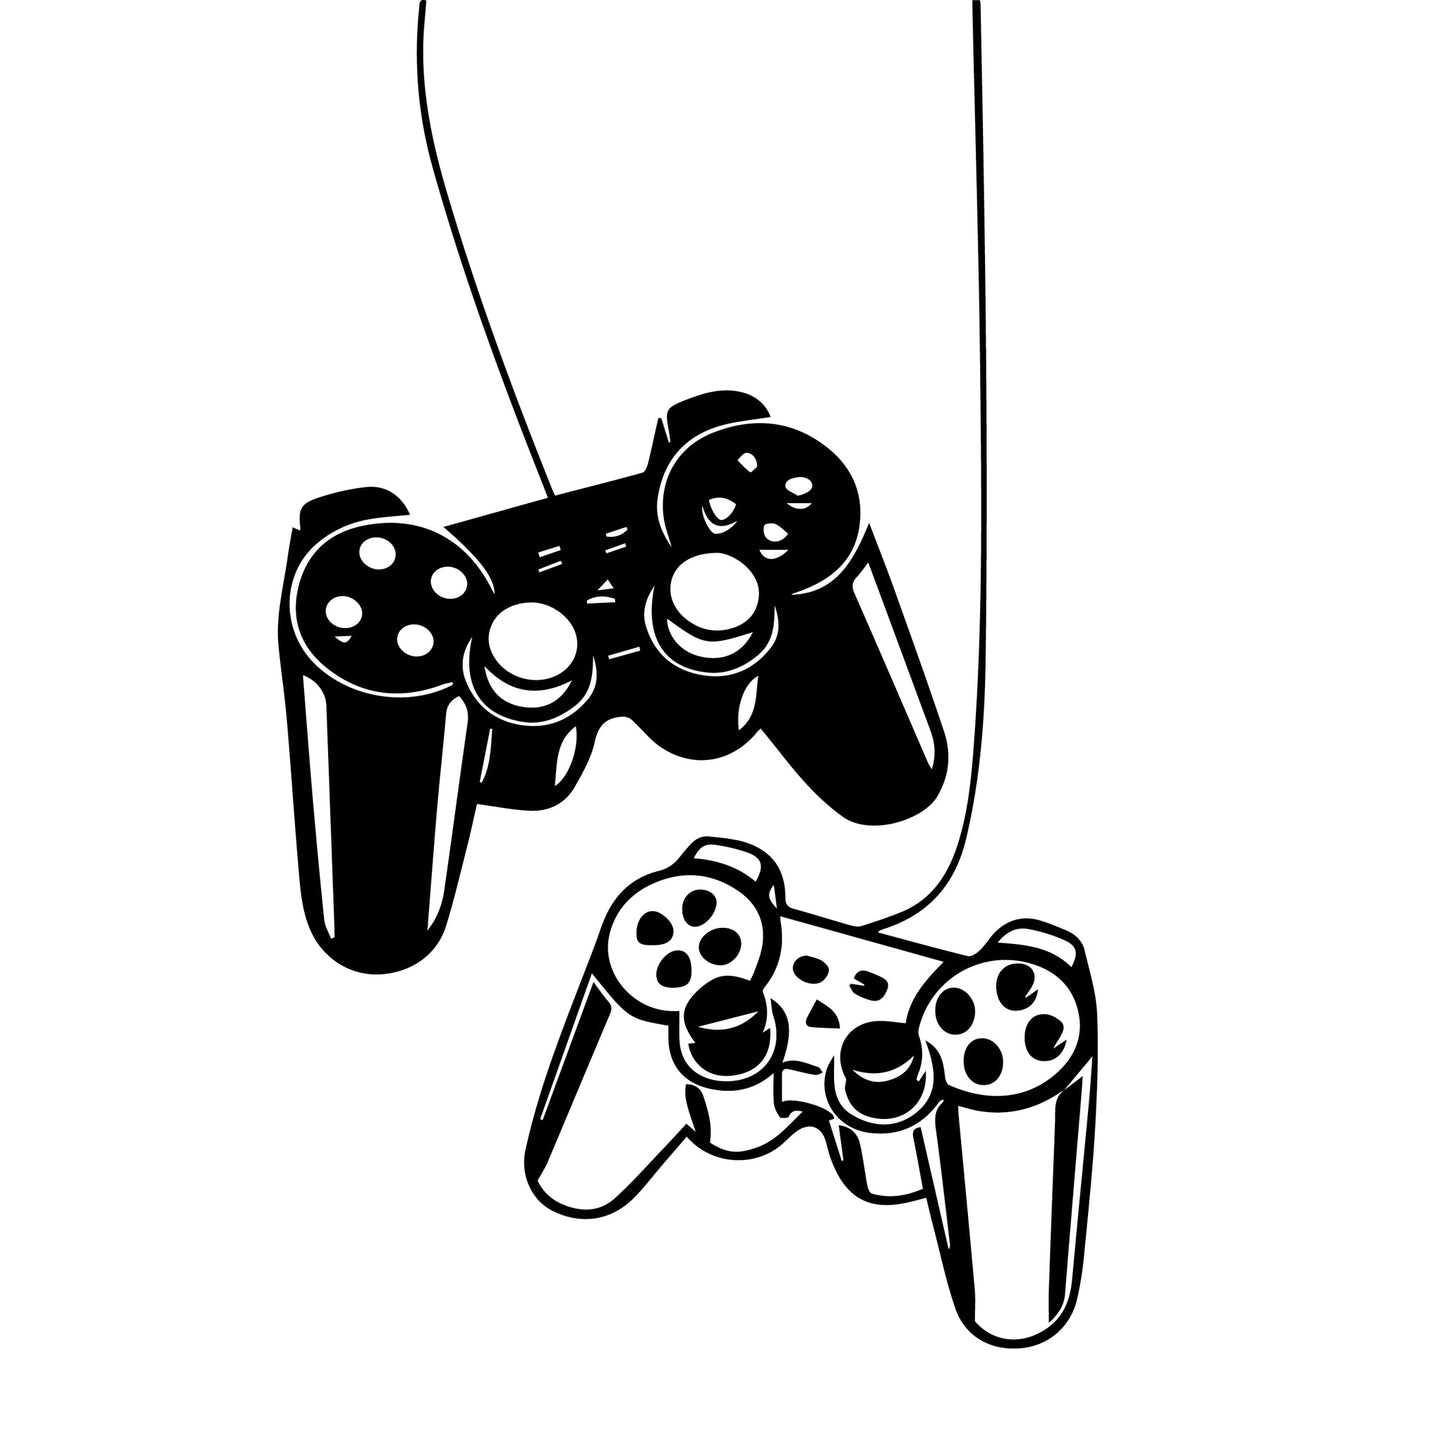 Gaming Controller - Wall Decal Sticker